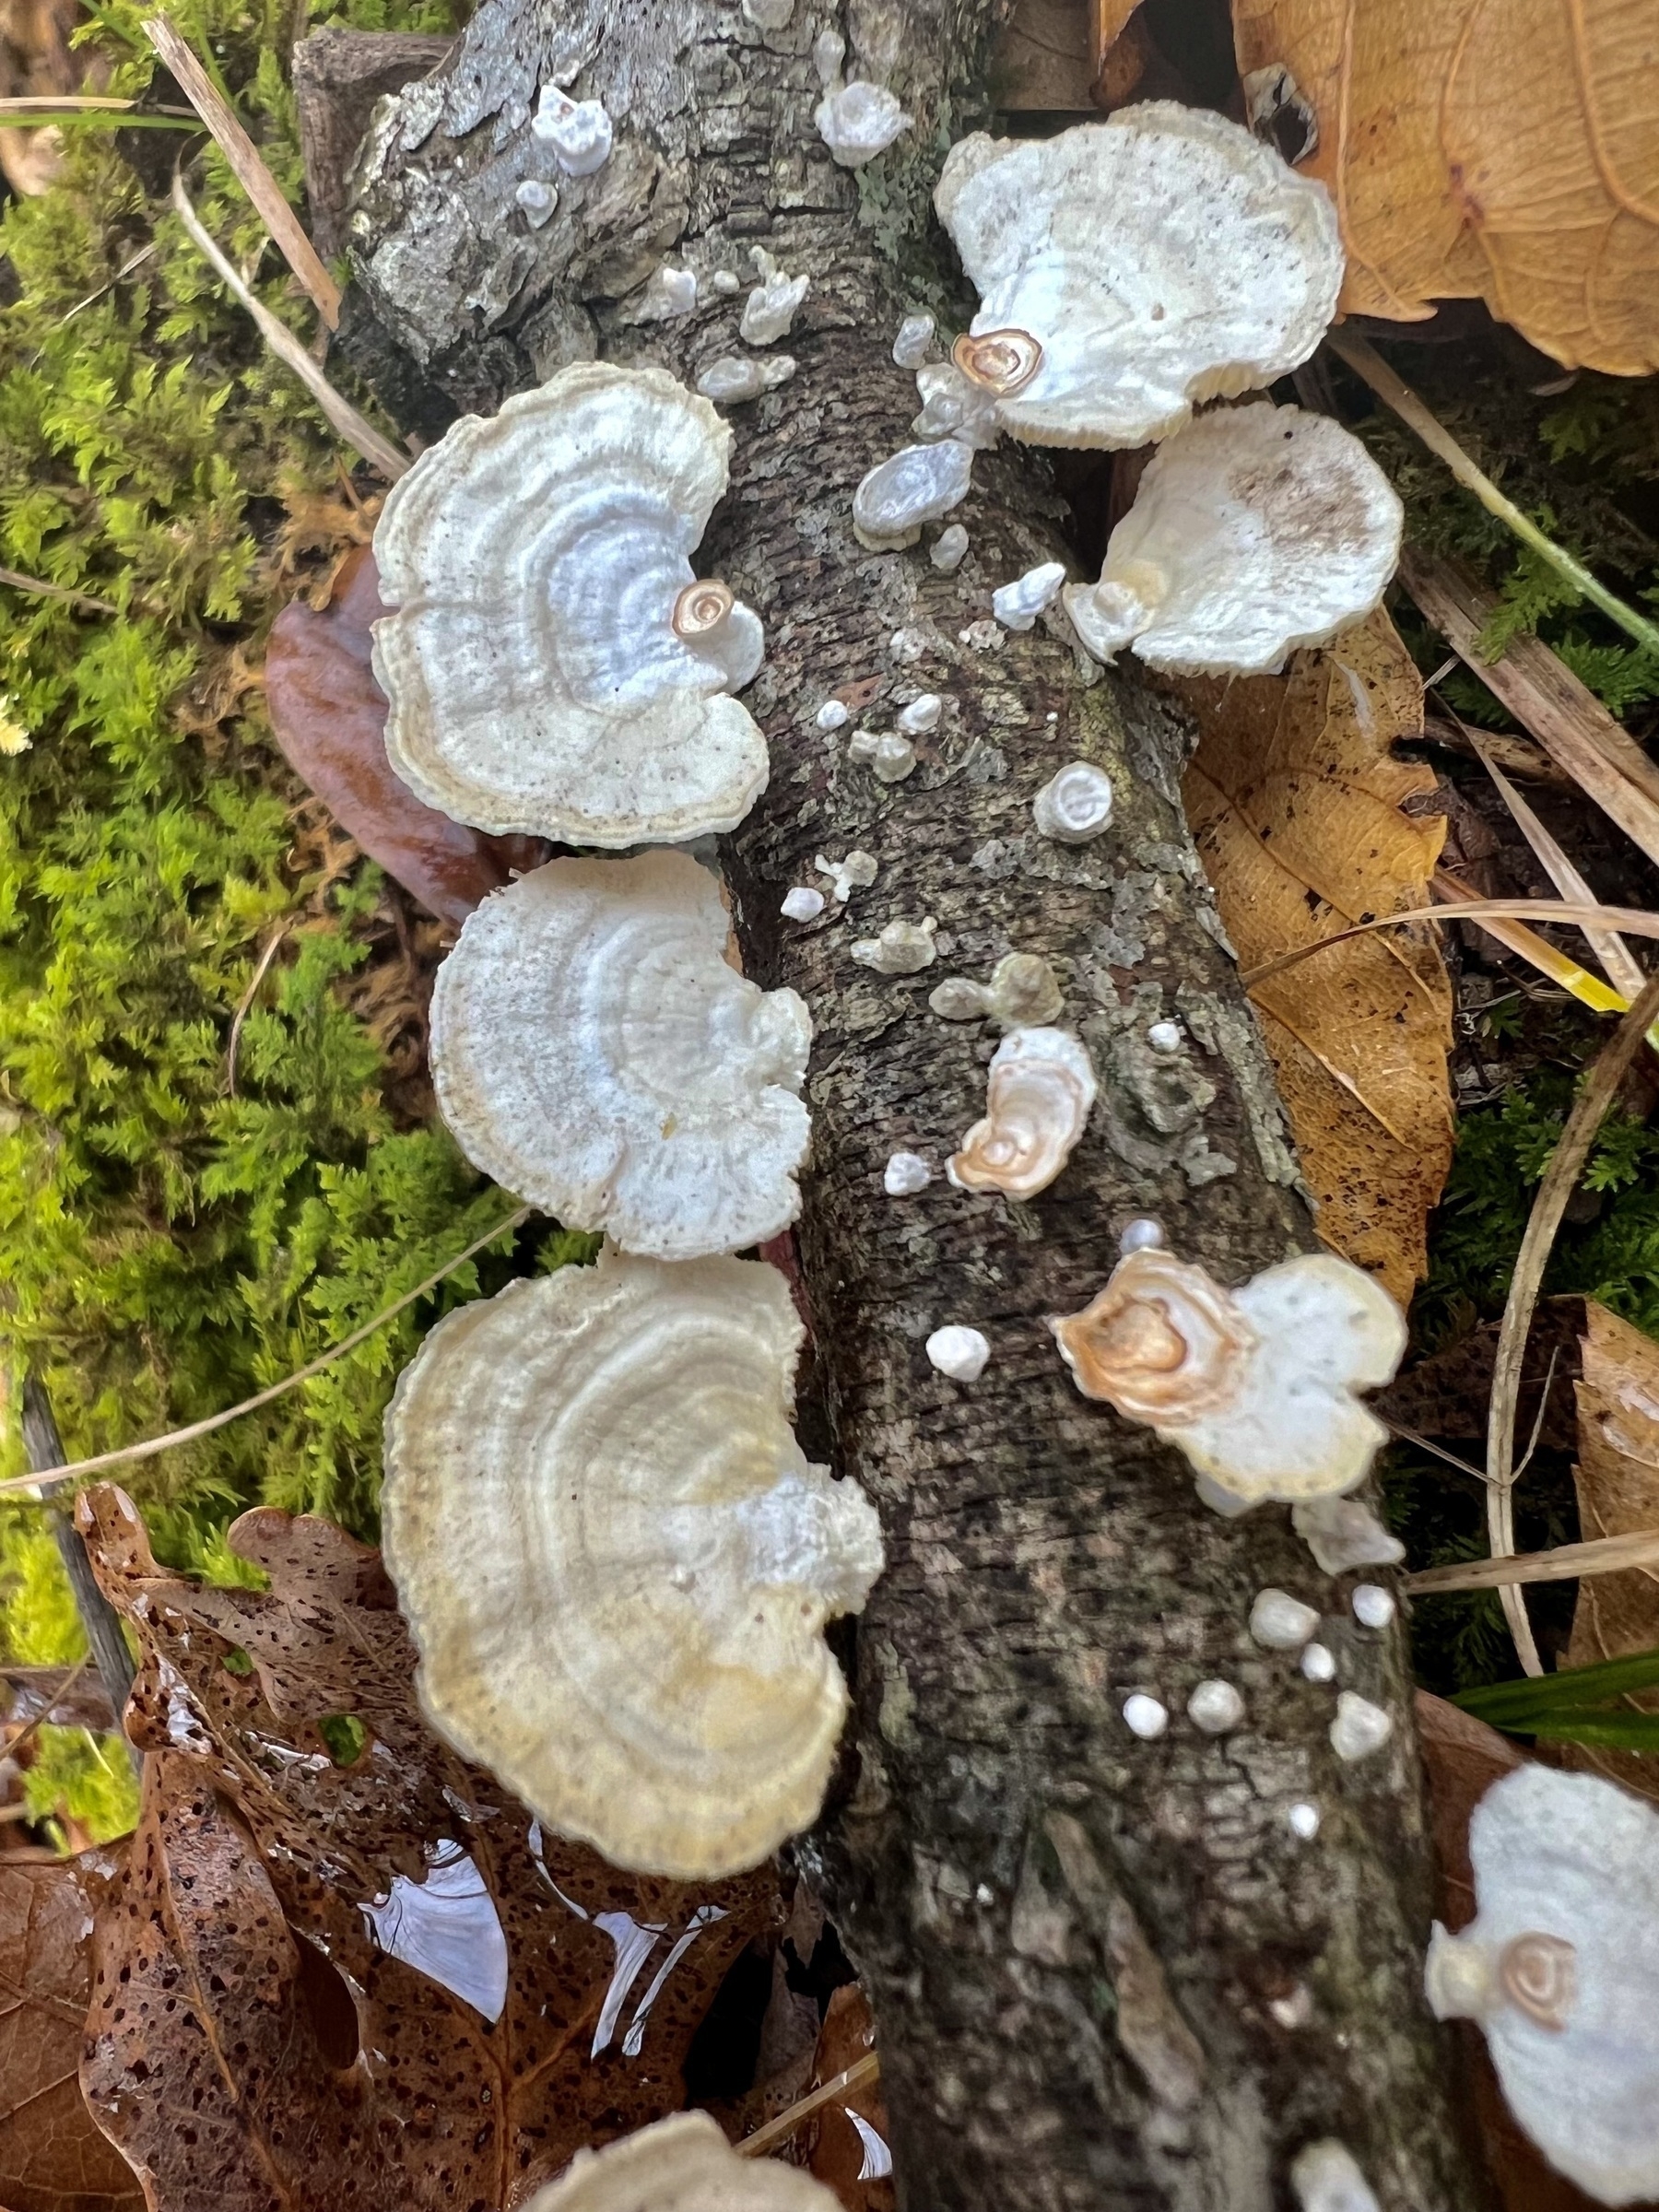 Primarily white fungi grow from a fallen tree branch. They are a half circle shape with a stem attachment to the branch on the flat side of the fungi. The have faint orangish brown rings dispersed across the surface. The branch and fungi are resting on a backgound of green moss and brown leaves.